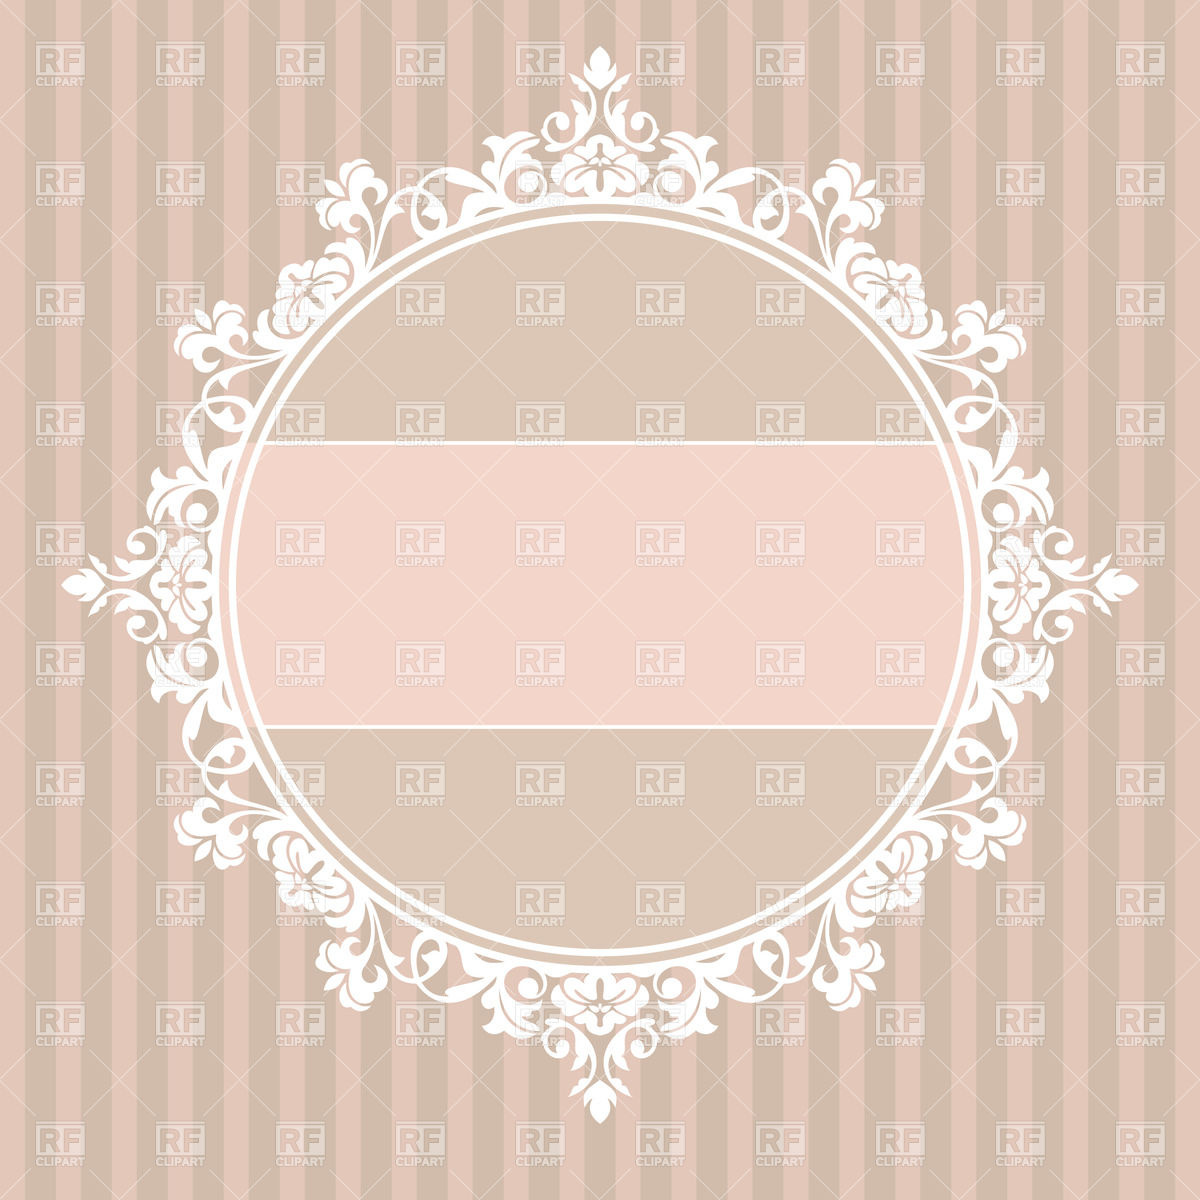 Vintage Frame With Lace Edging On Striped Background Download Royalty